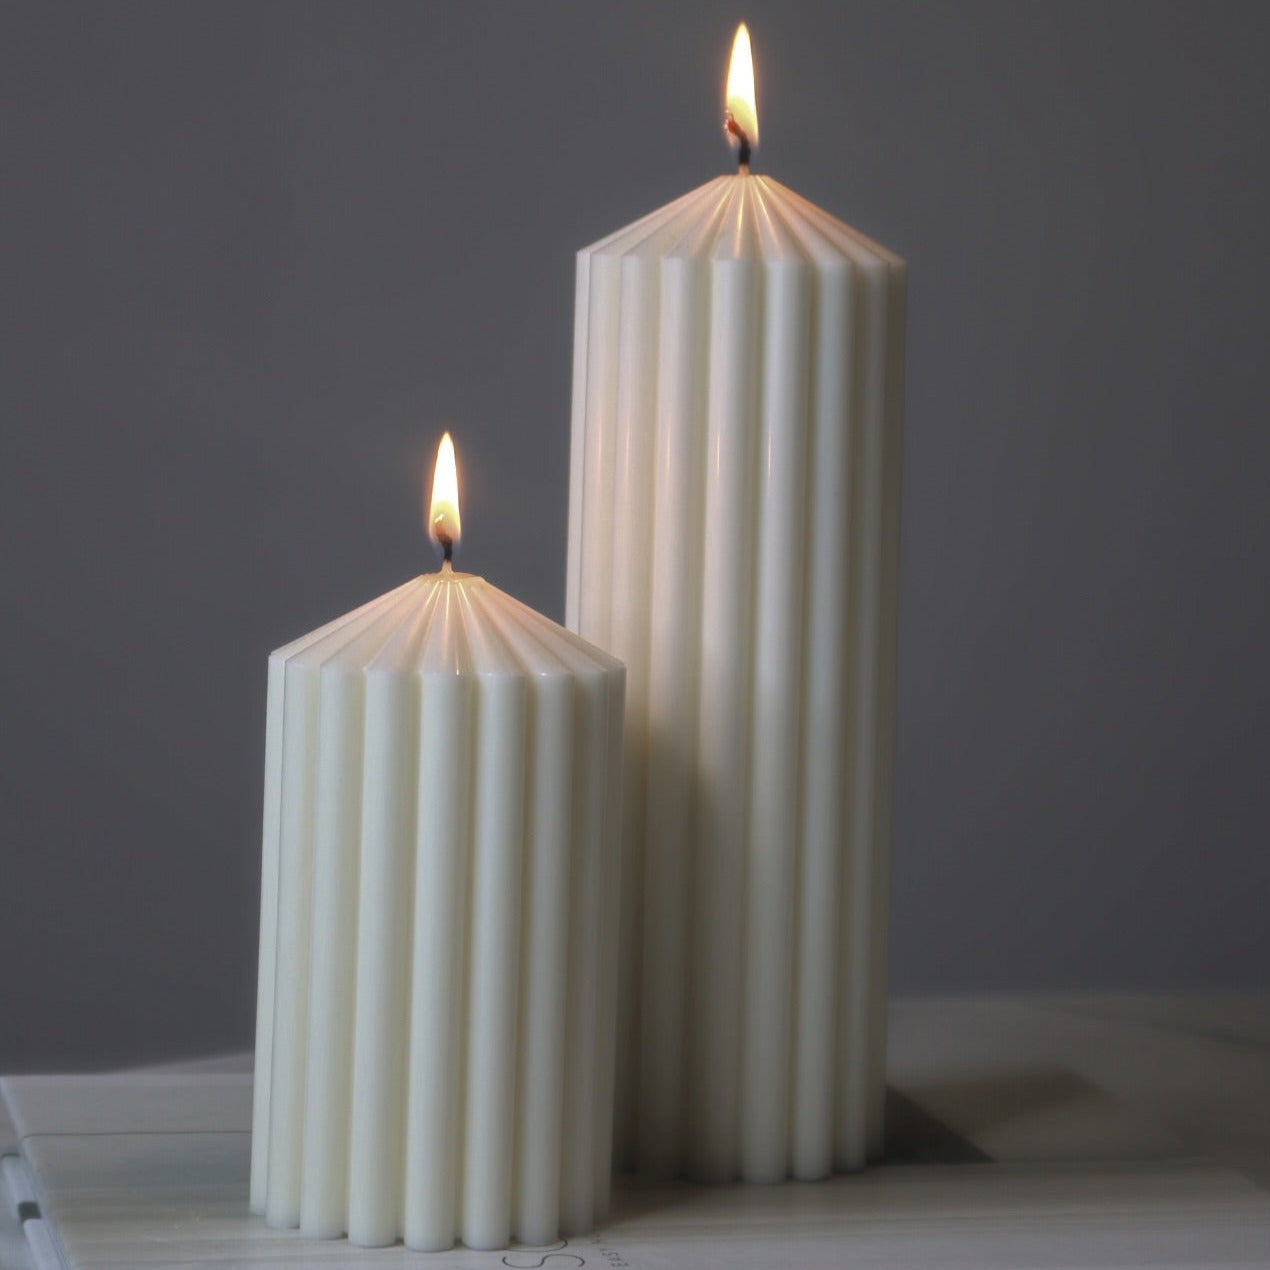 6 Ply Cotton Wick, Myka Candles & Moulds